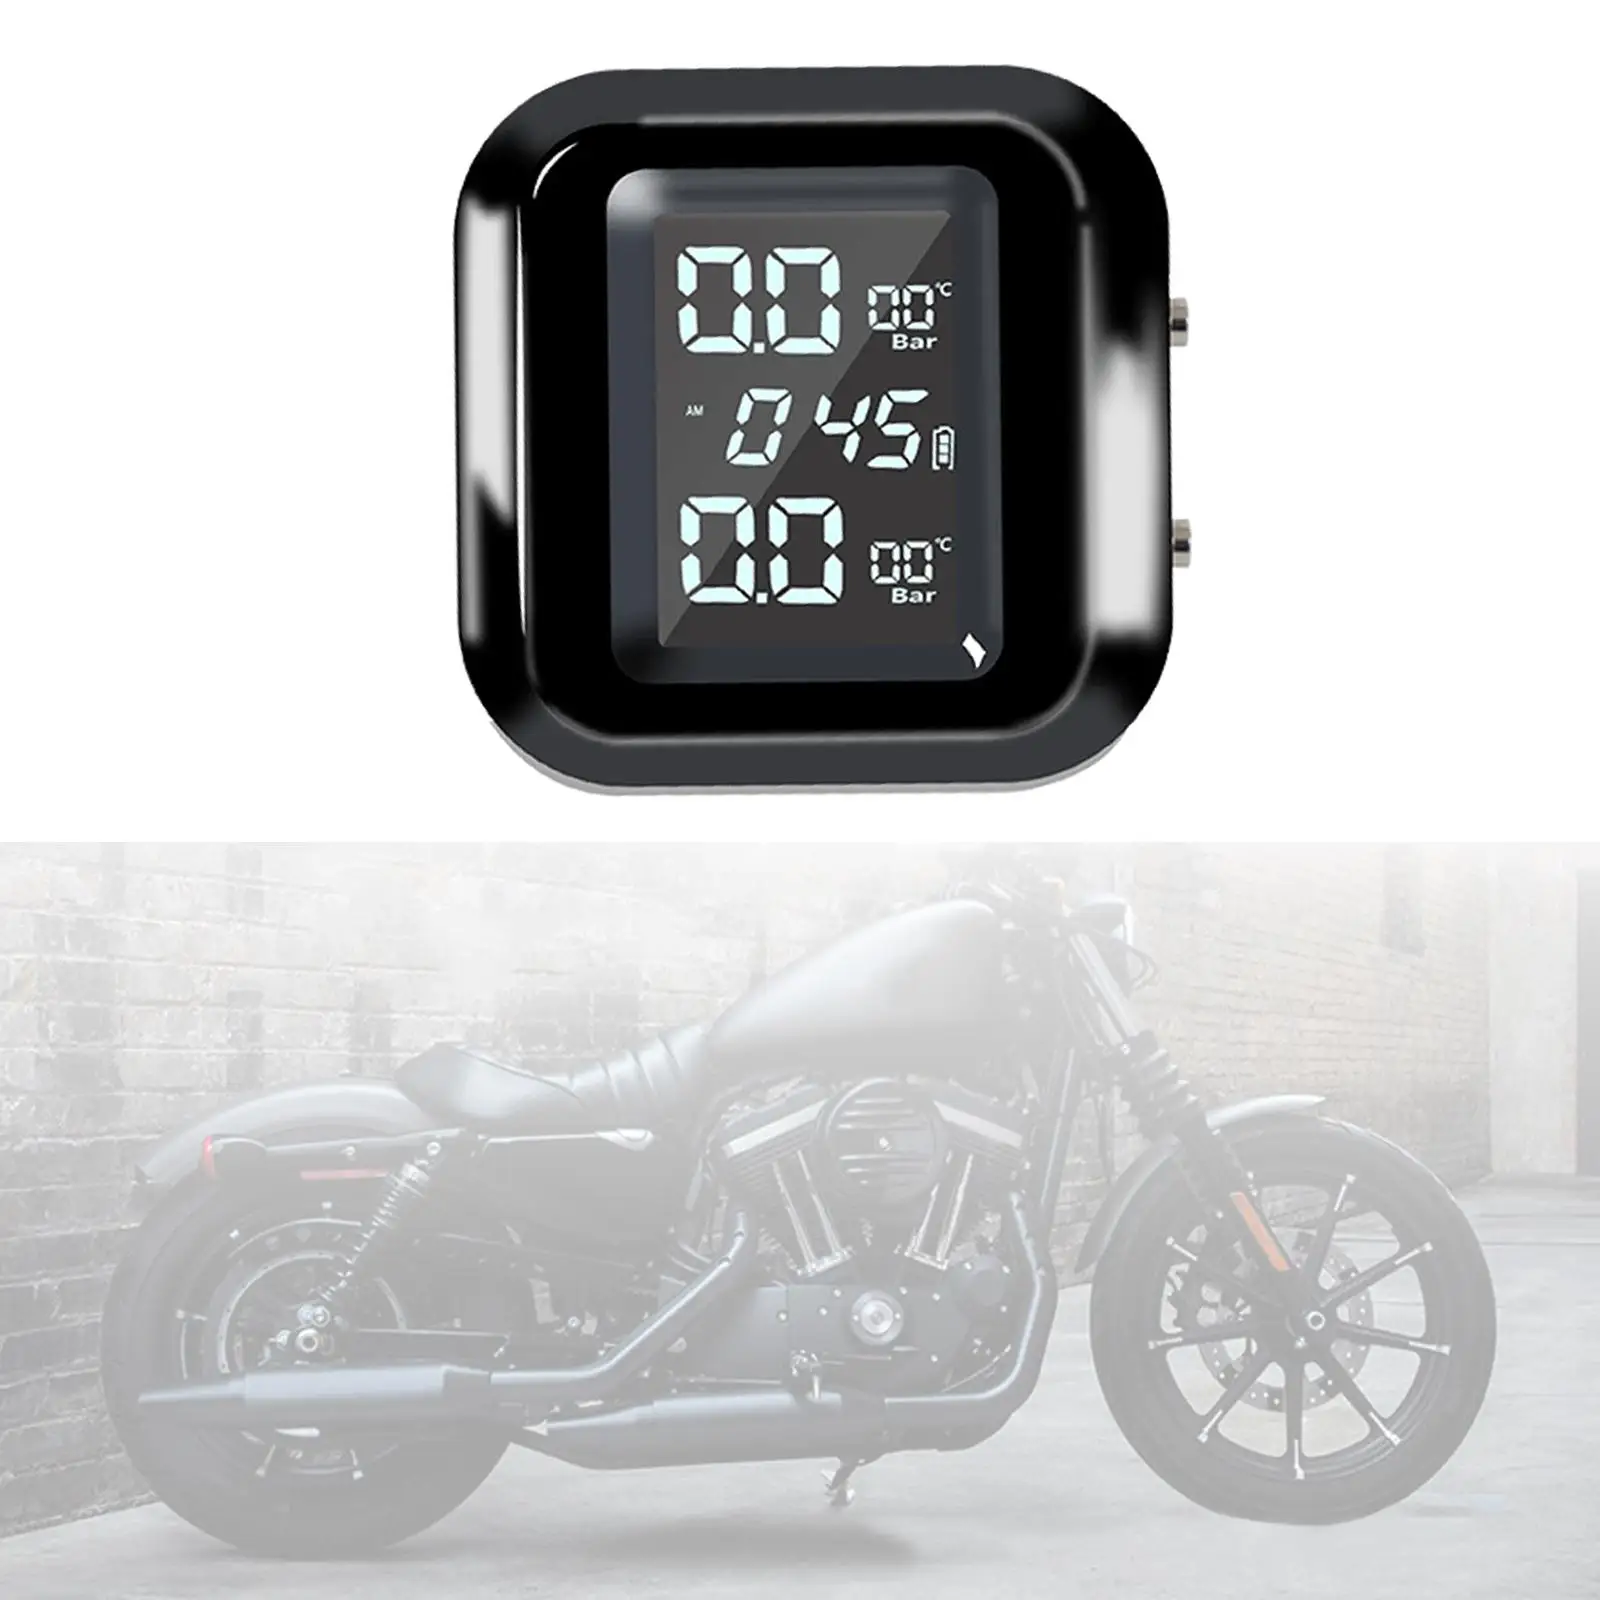 Motorcycle TPMS Tire Pressure Monitoring System Tyre Temperature Real Time 2 External Sensors Dust-Proof 0.1Bar Accurancy